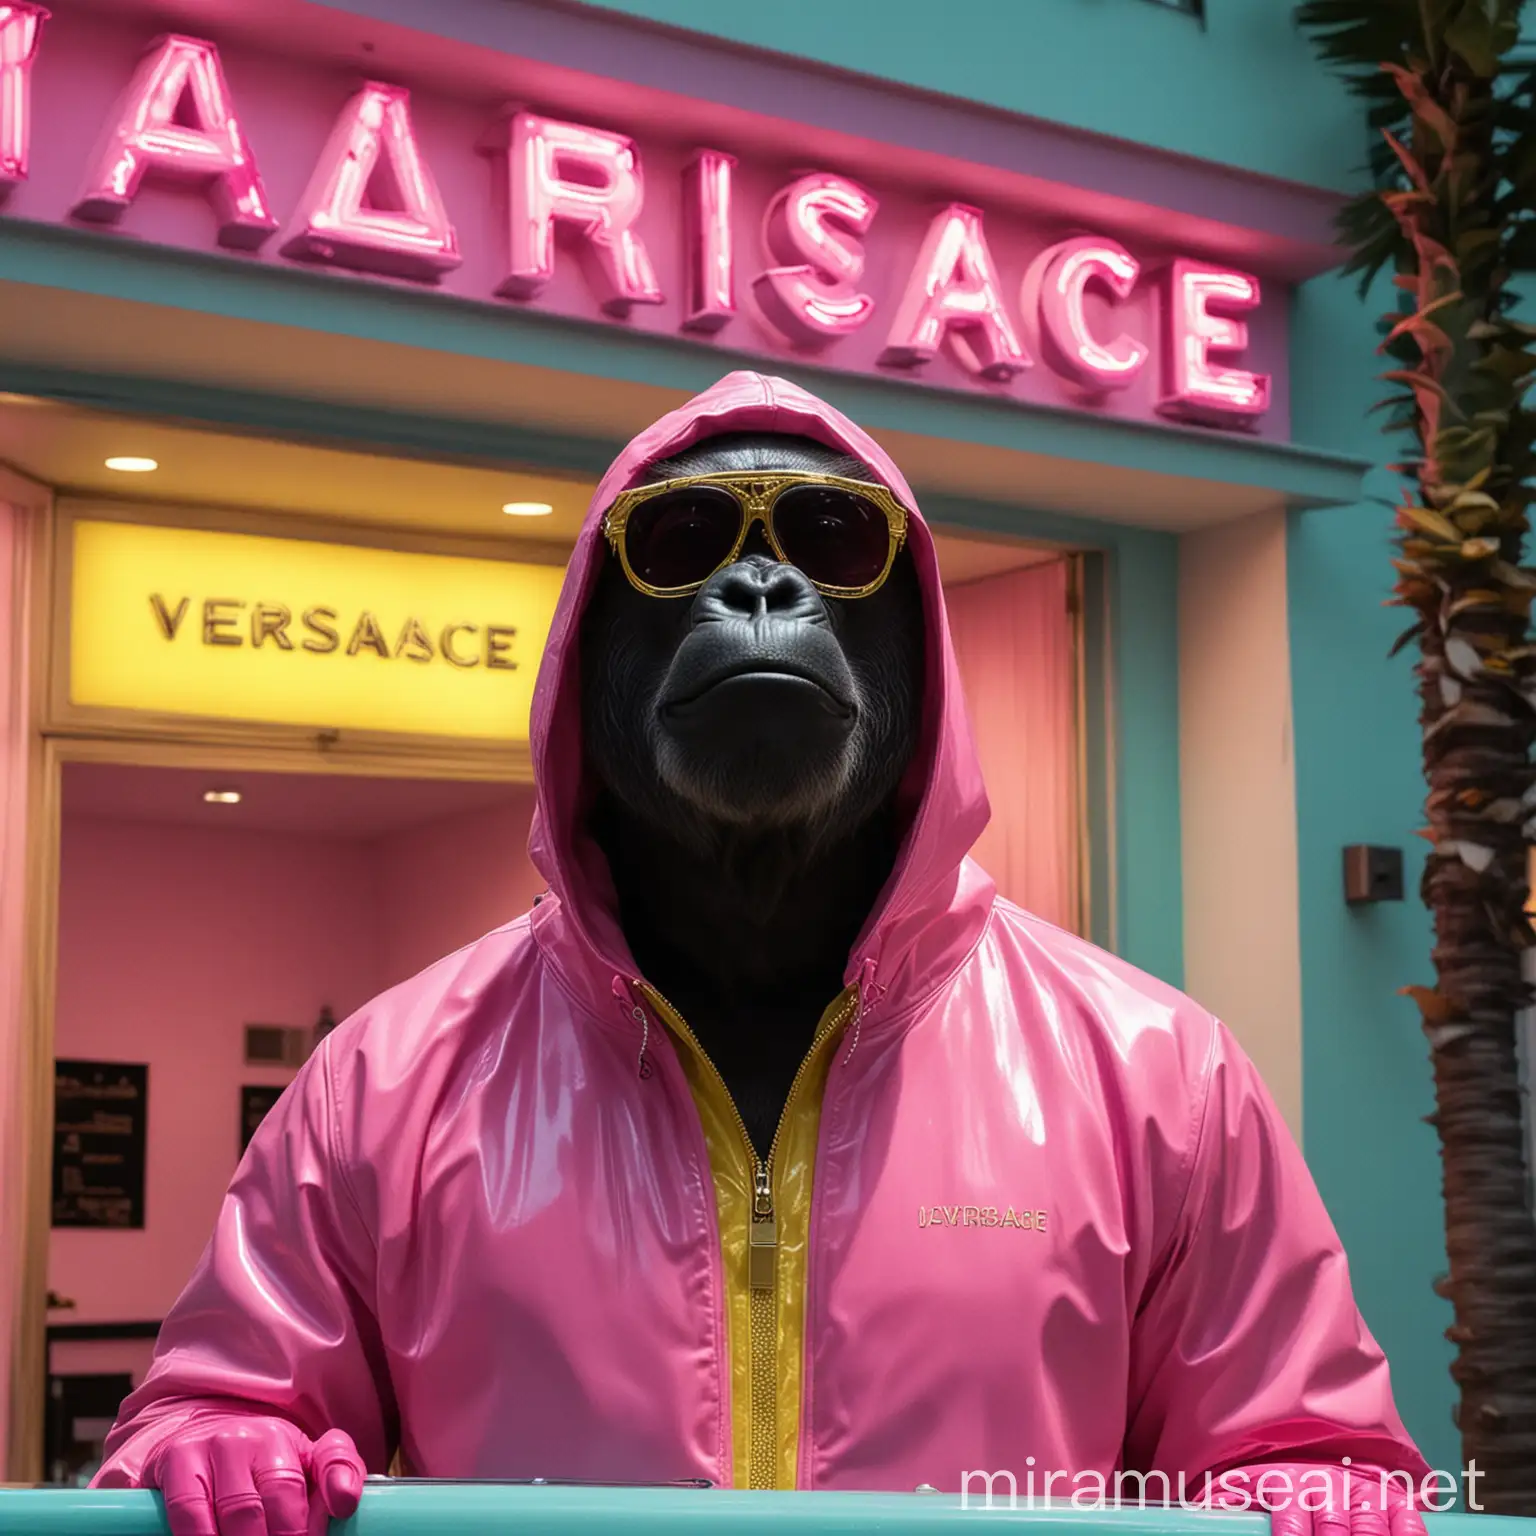 The gorilla is in Miami, it's night, and there's art deco architecture with green and pink neon lights illuminating the area. The gorilla wears dark sunglasses and a yellow jumpsuit like the one in the Breaking Bad series. His head is covered by the yellow hood. His hands are covered with light blue latex gloves. A pink neon sign advertises the VERSACE brand behind him. The neon sign displays this text: FAKE VERSACE. The letter A is falling apart. Gorila faces the camera